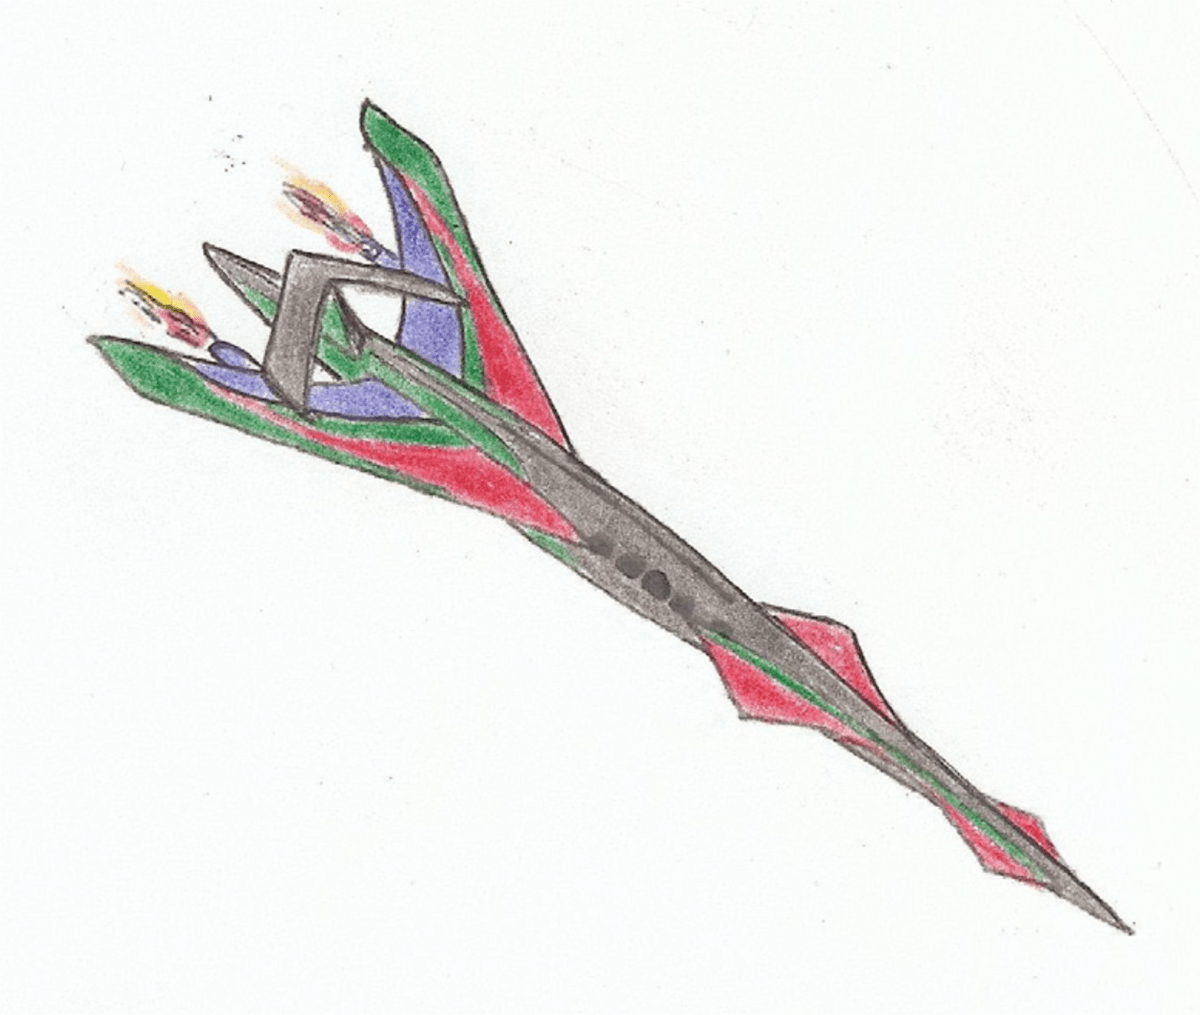 Colorful drawing of the concept of the Arrow aircraft.